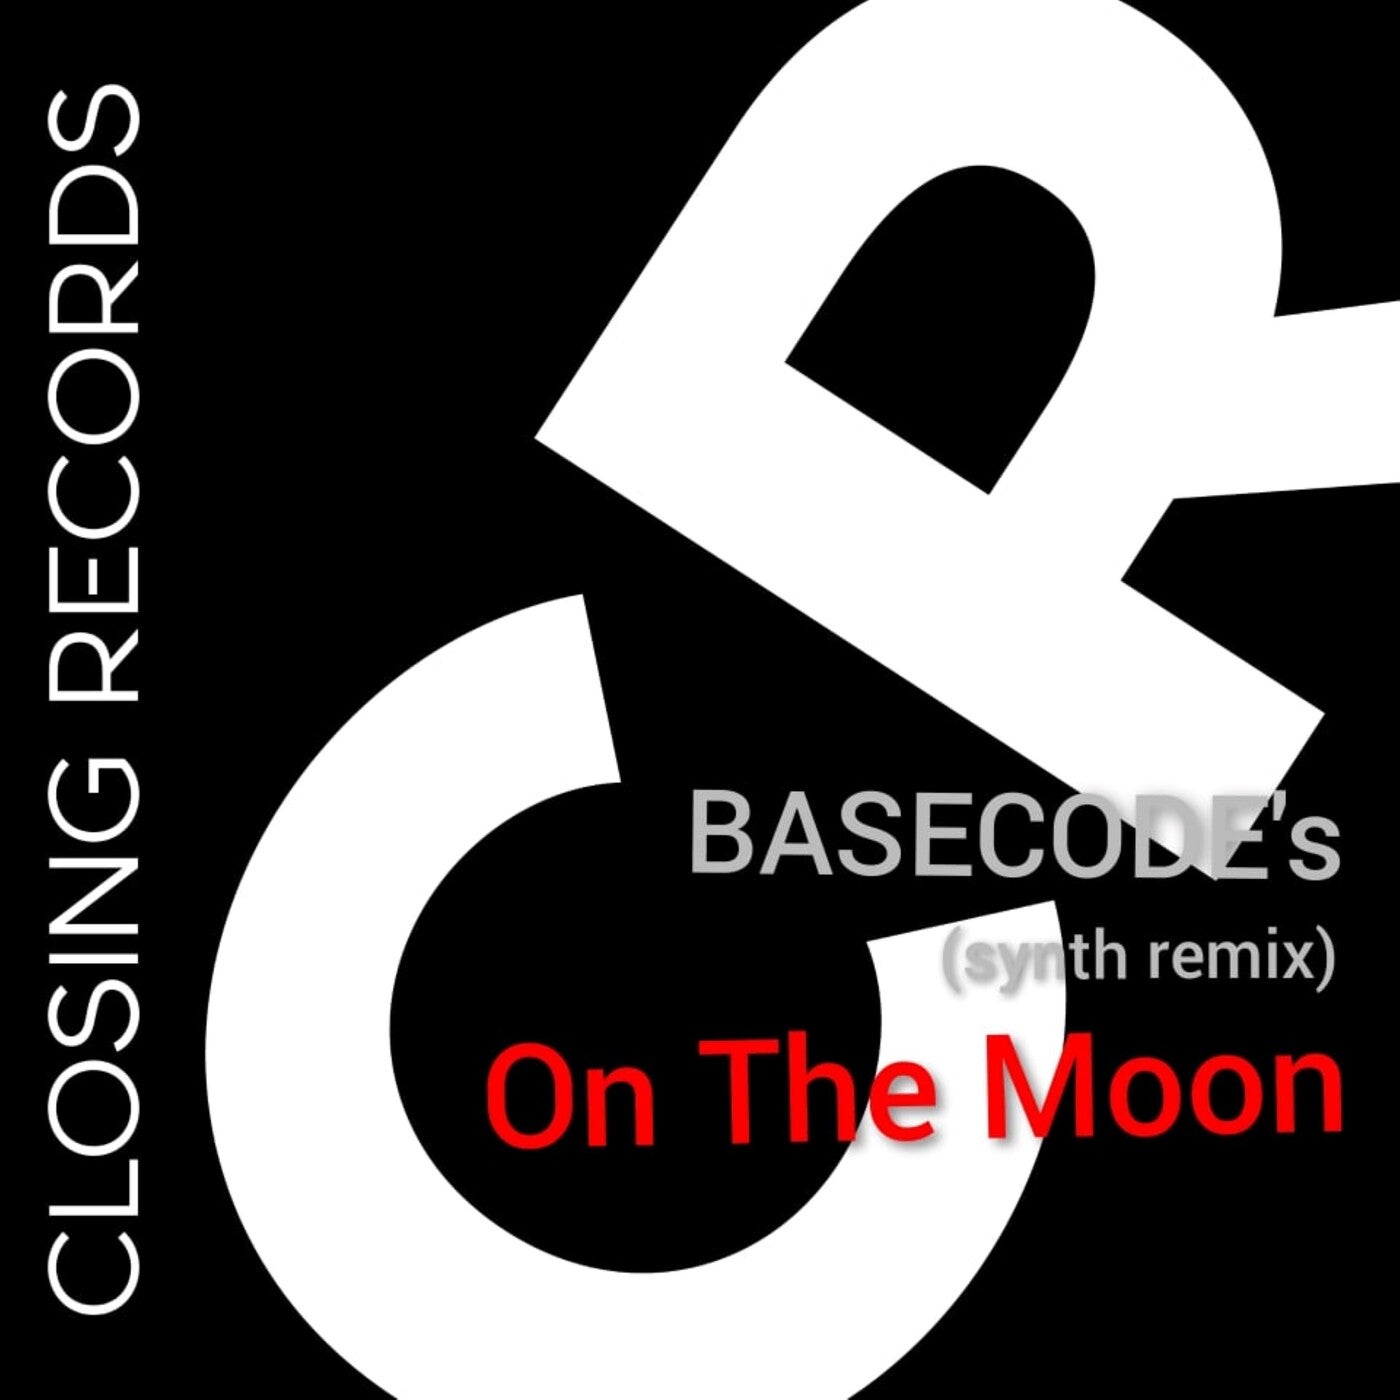 Marc Mosca, BASECODE - On the Moon (BASECODE Synth Remix) [MMCR250222]